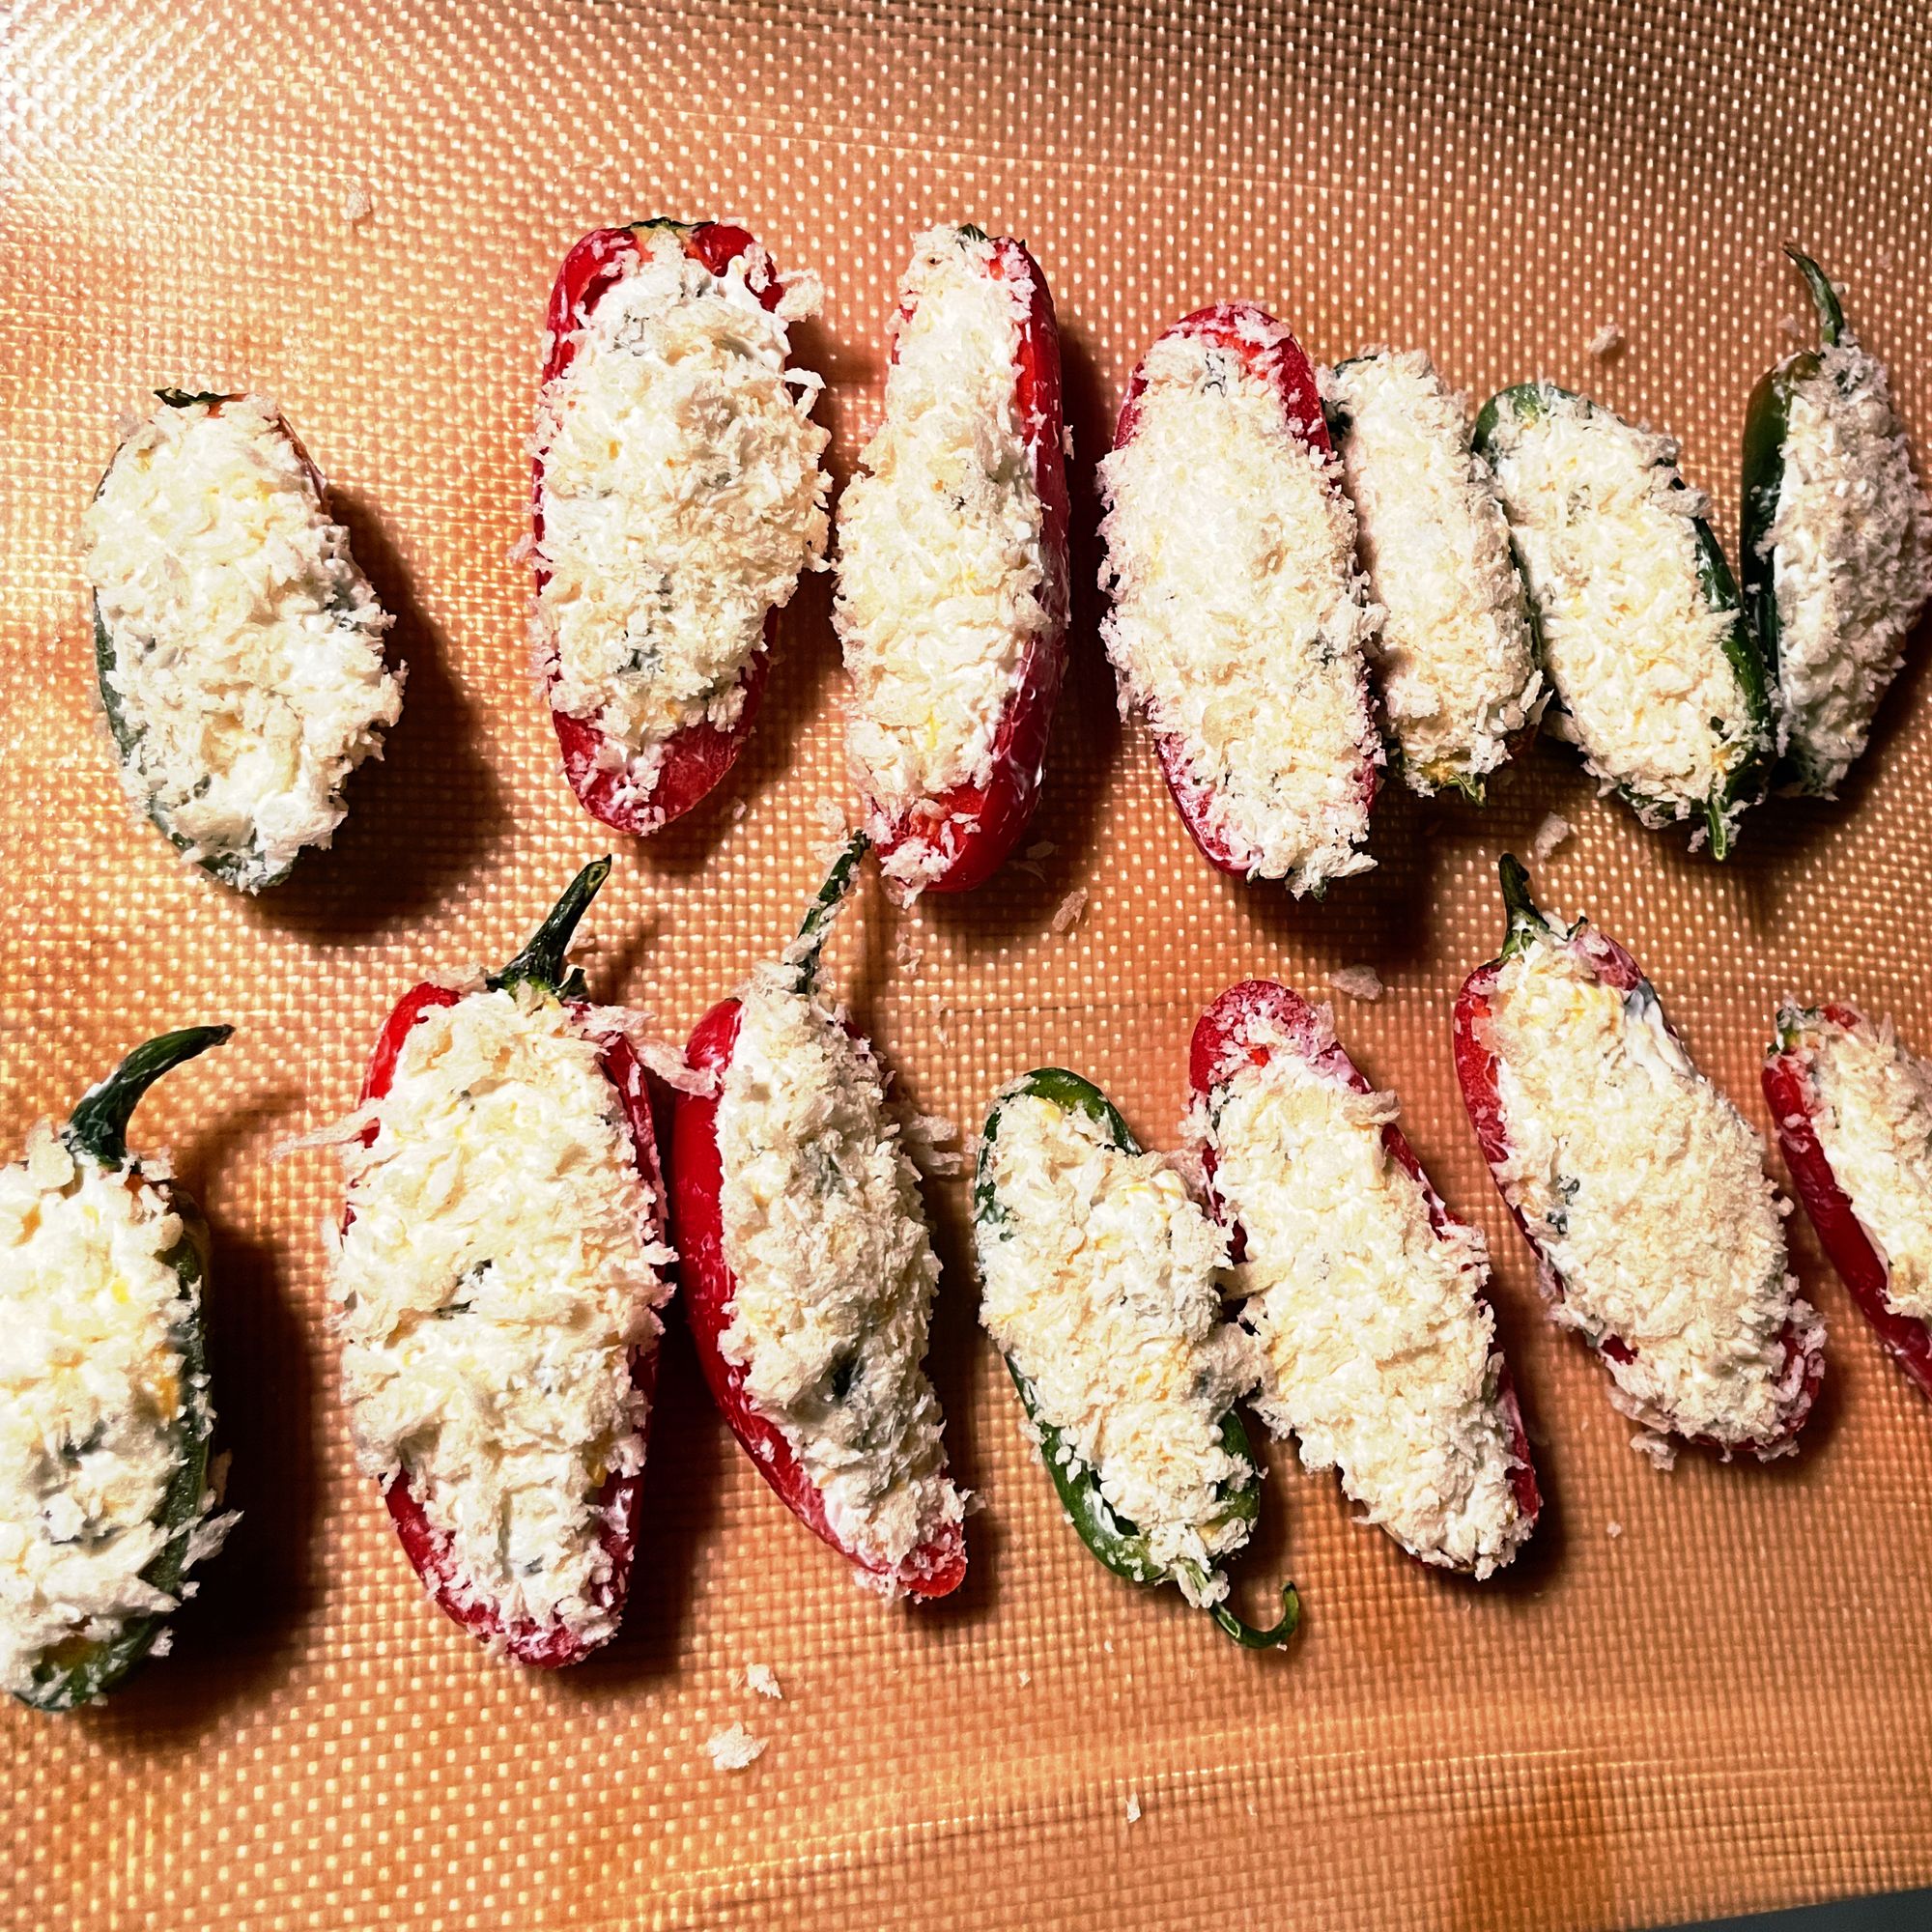 Baked Jalapeno Poppers With Panko Breadcrumbs